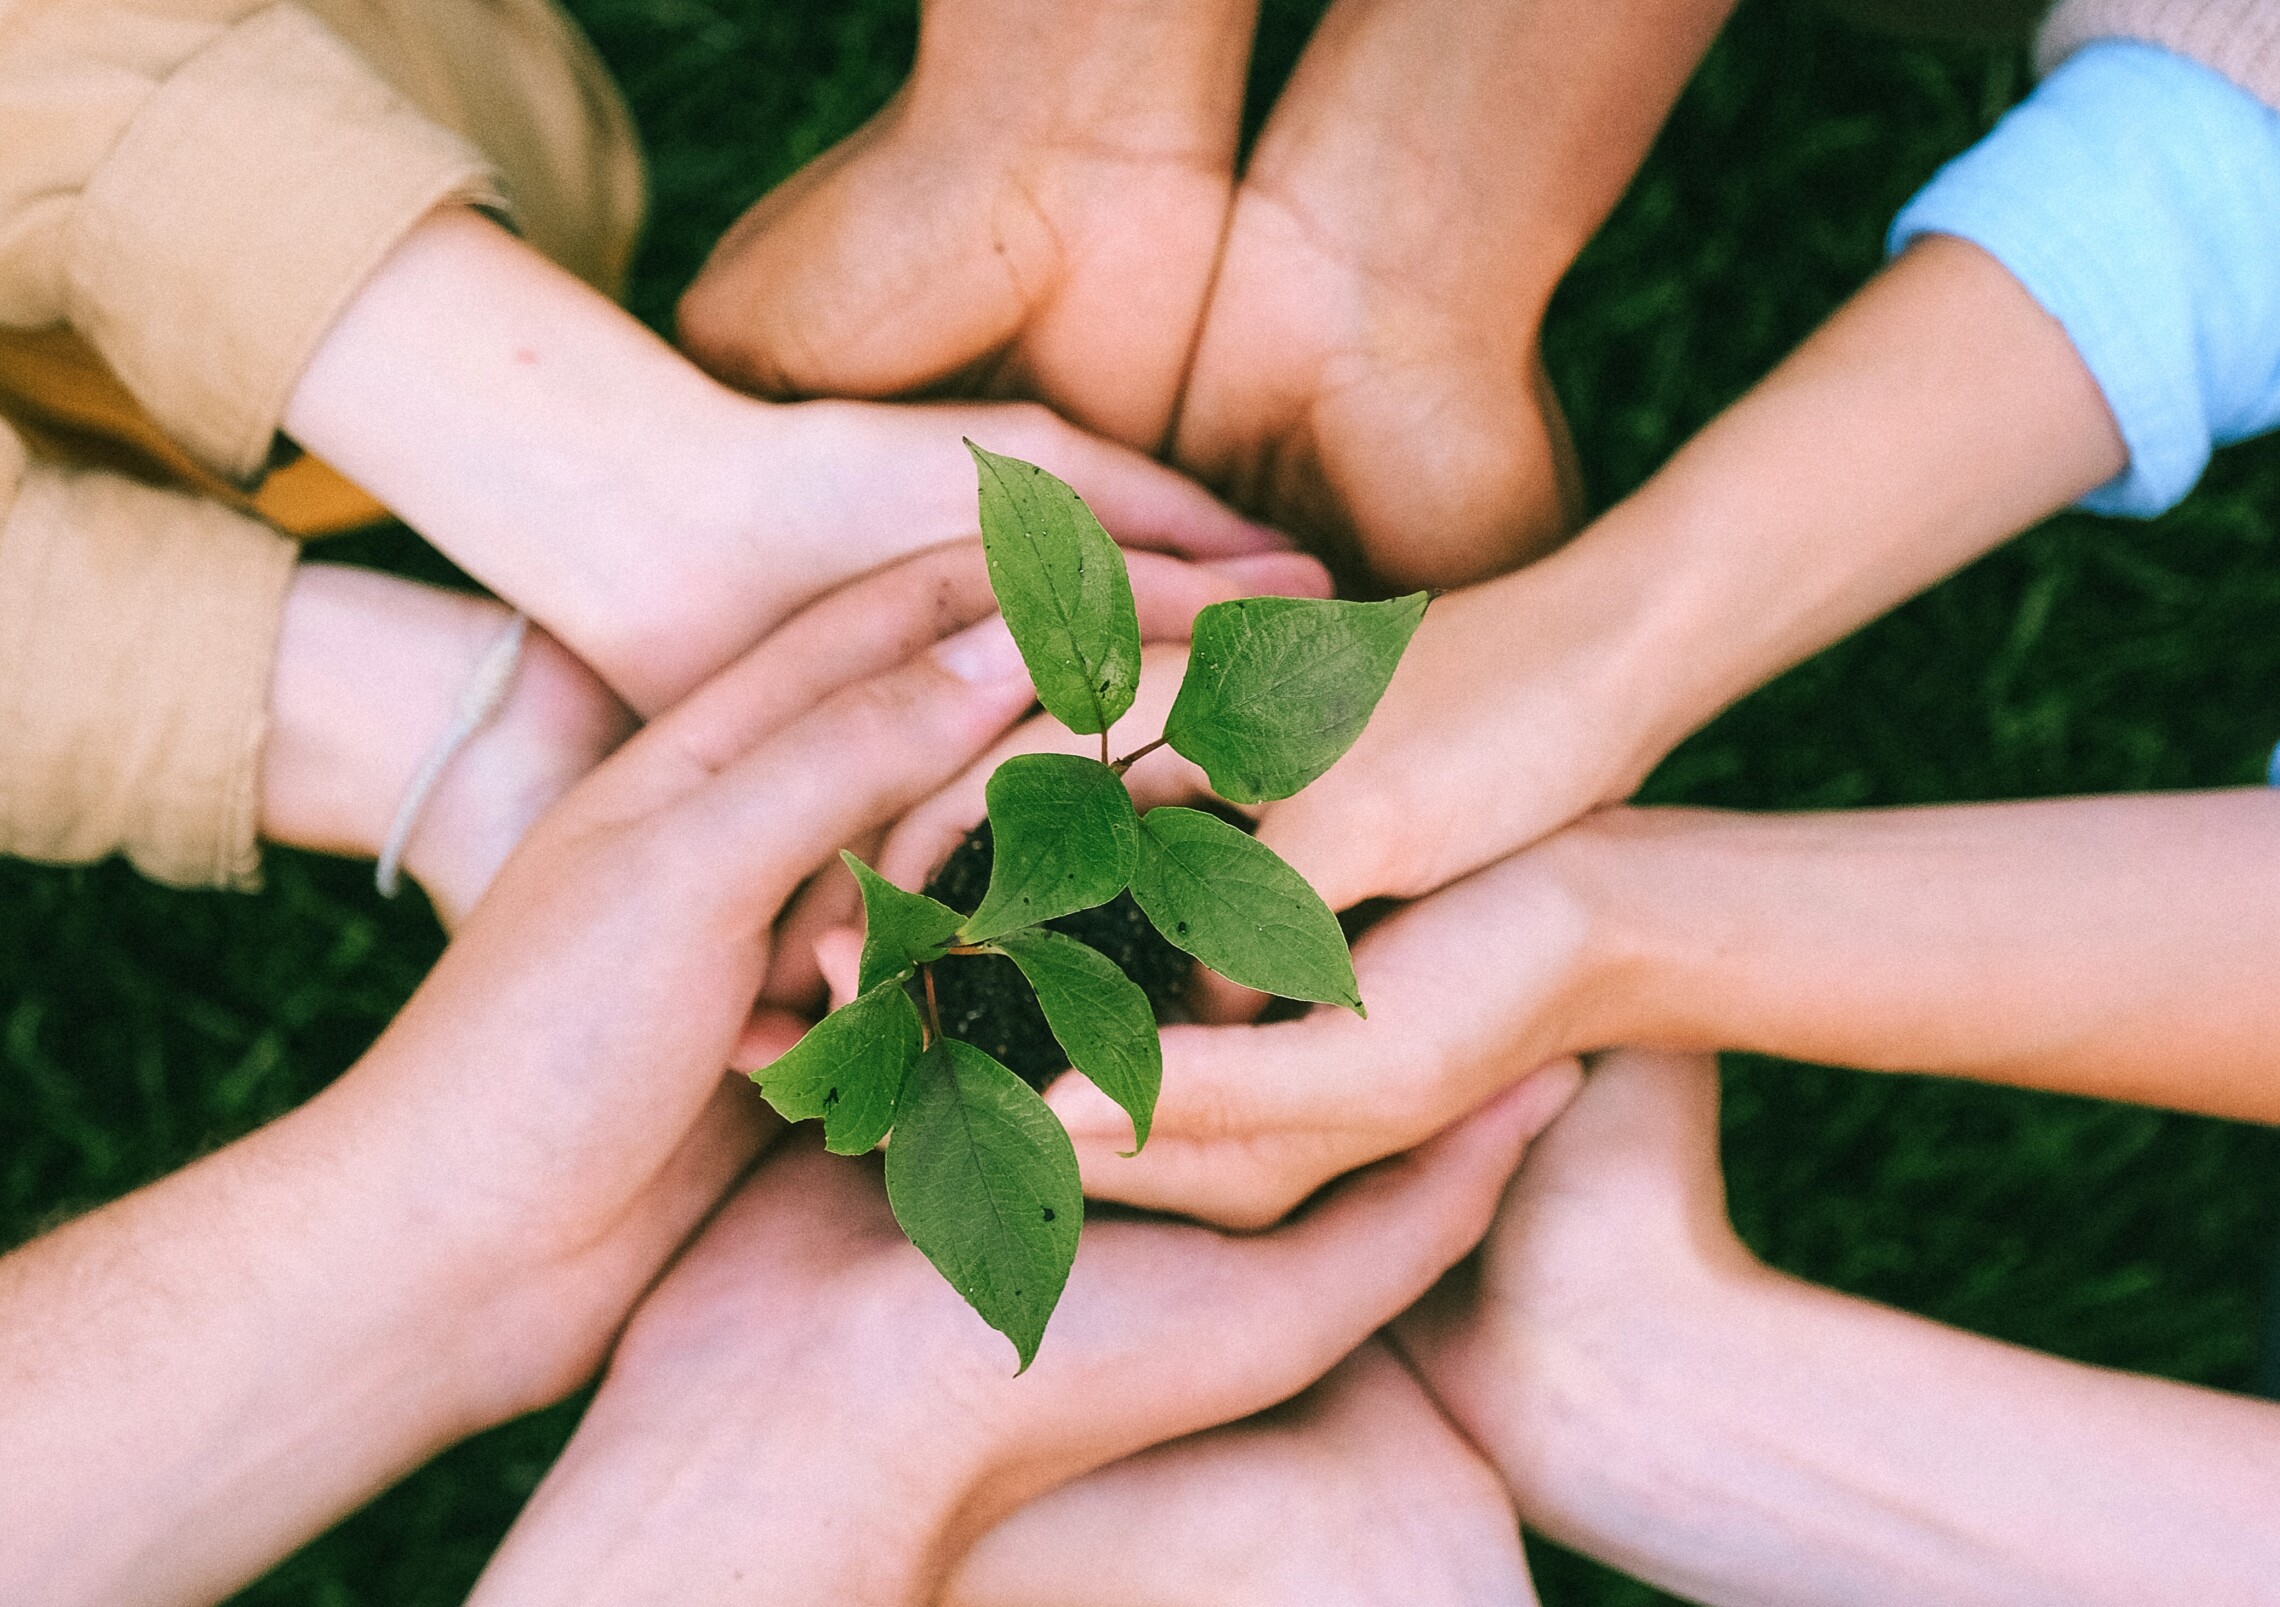 Hands of five people holding plant